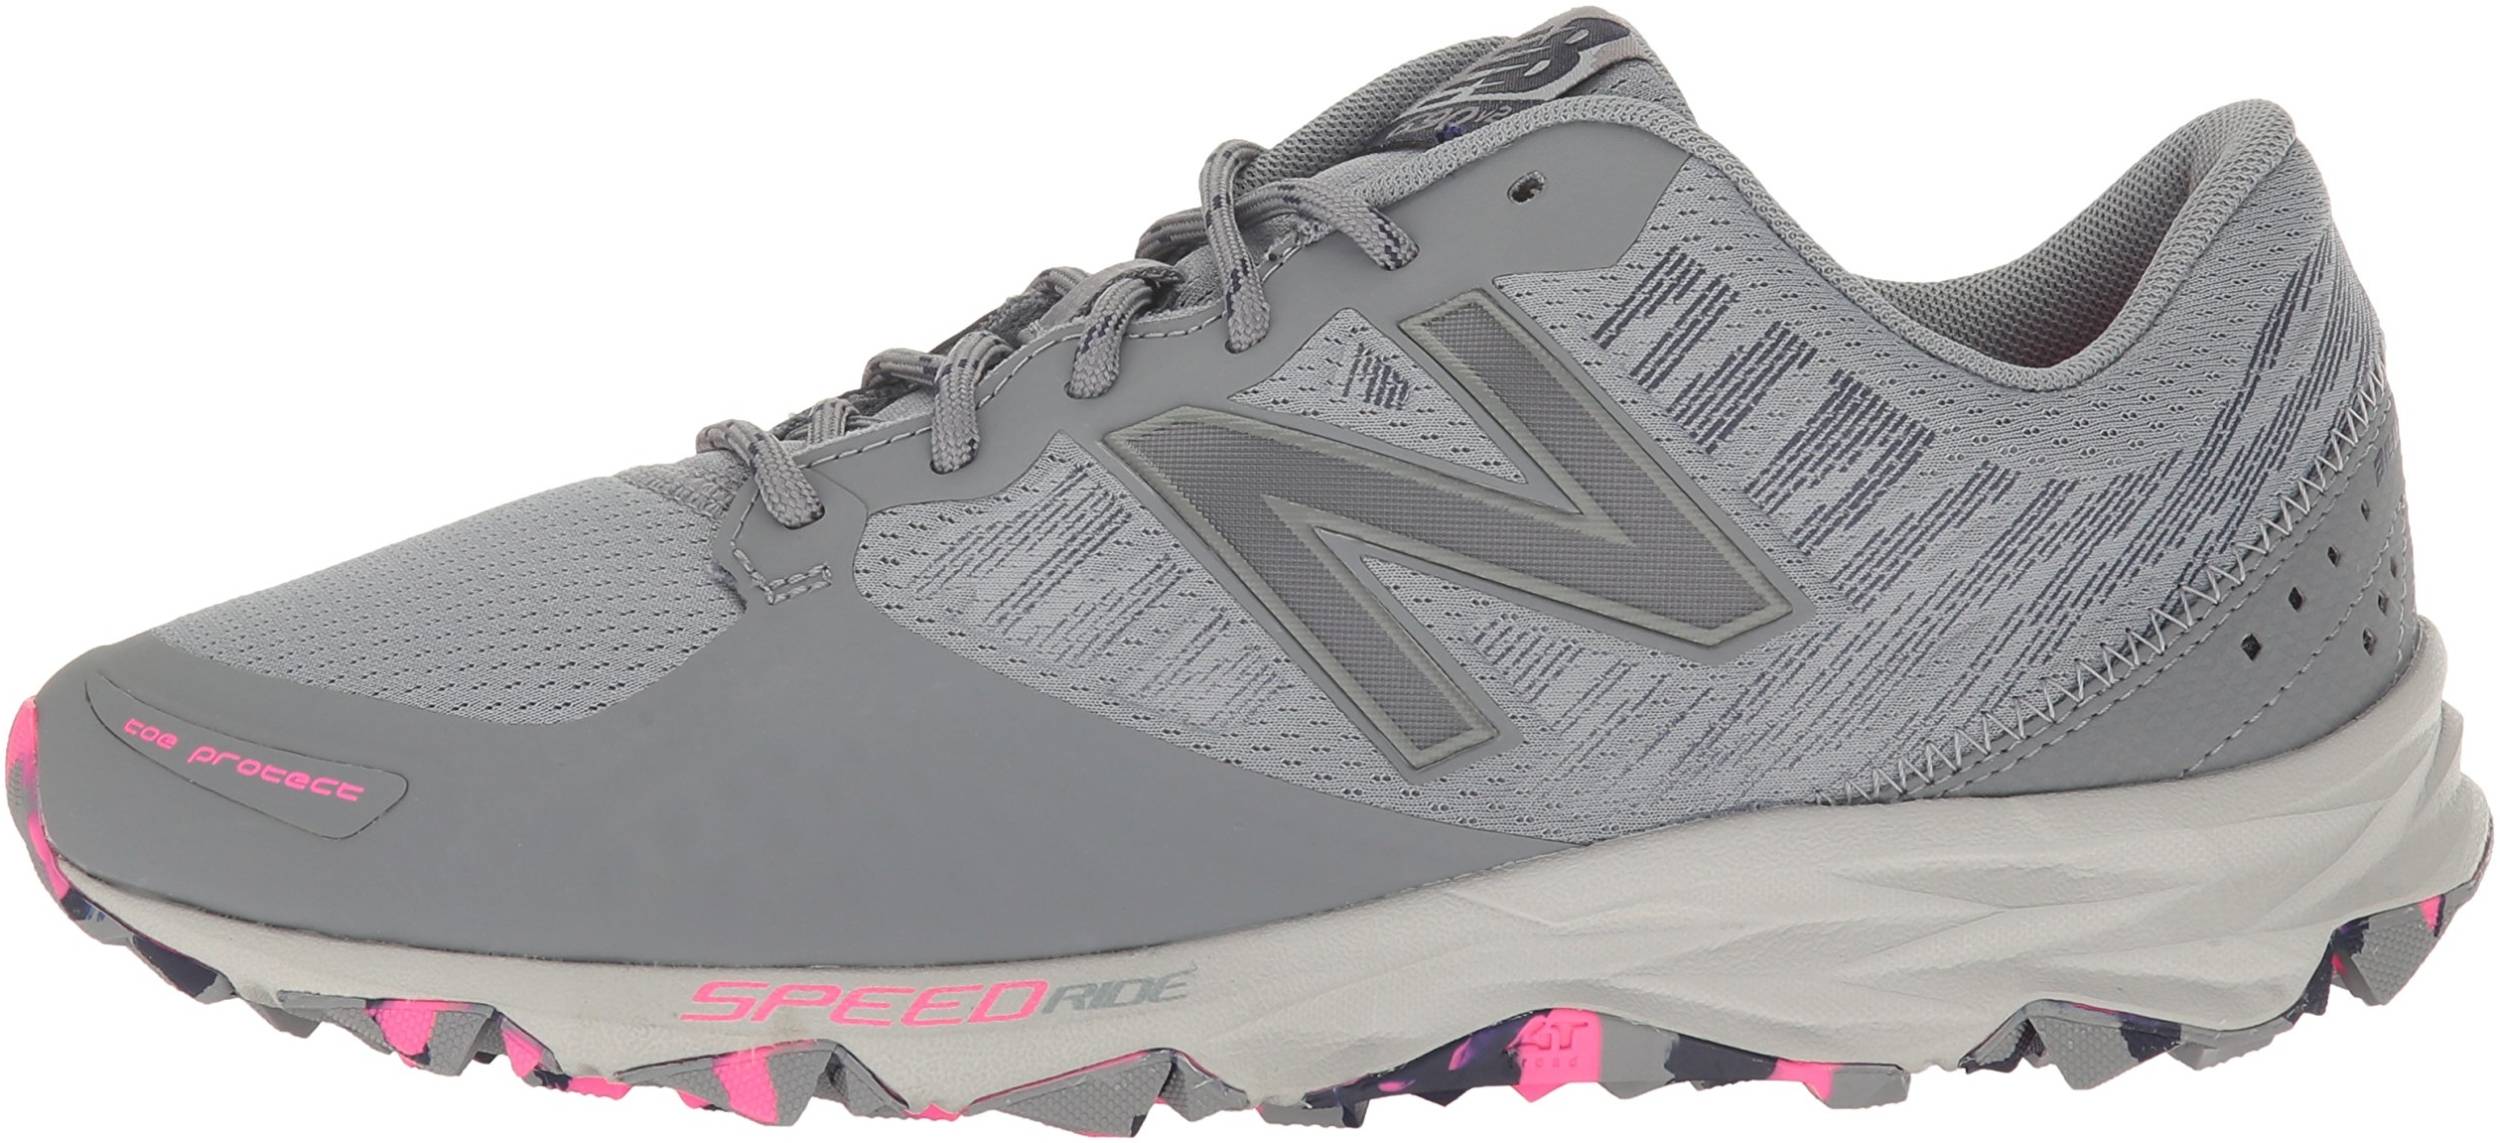 best trail running shoes new balance